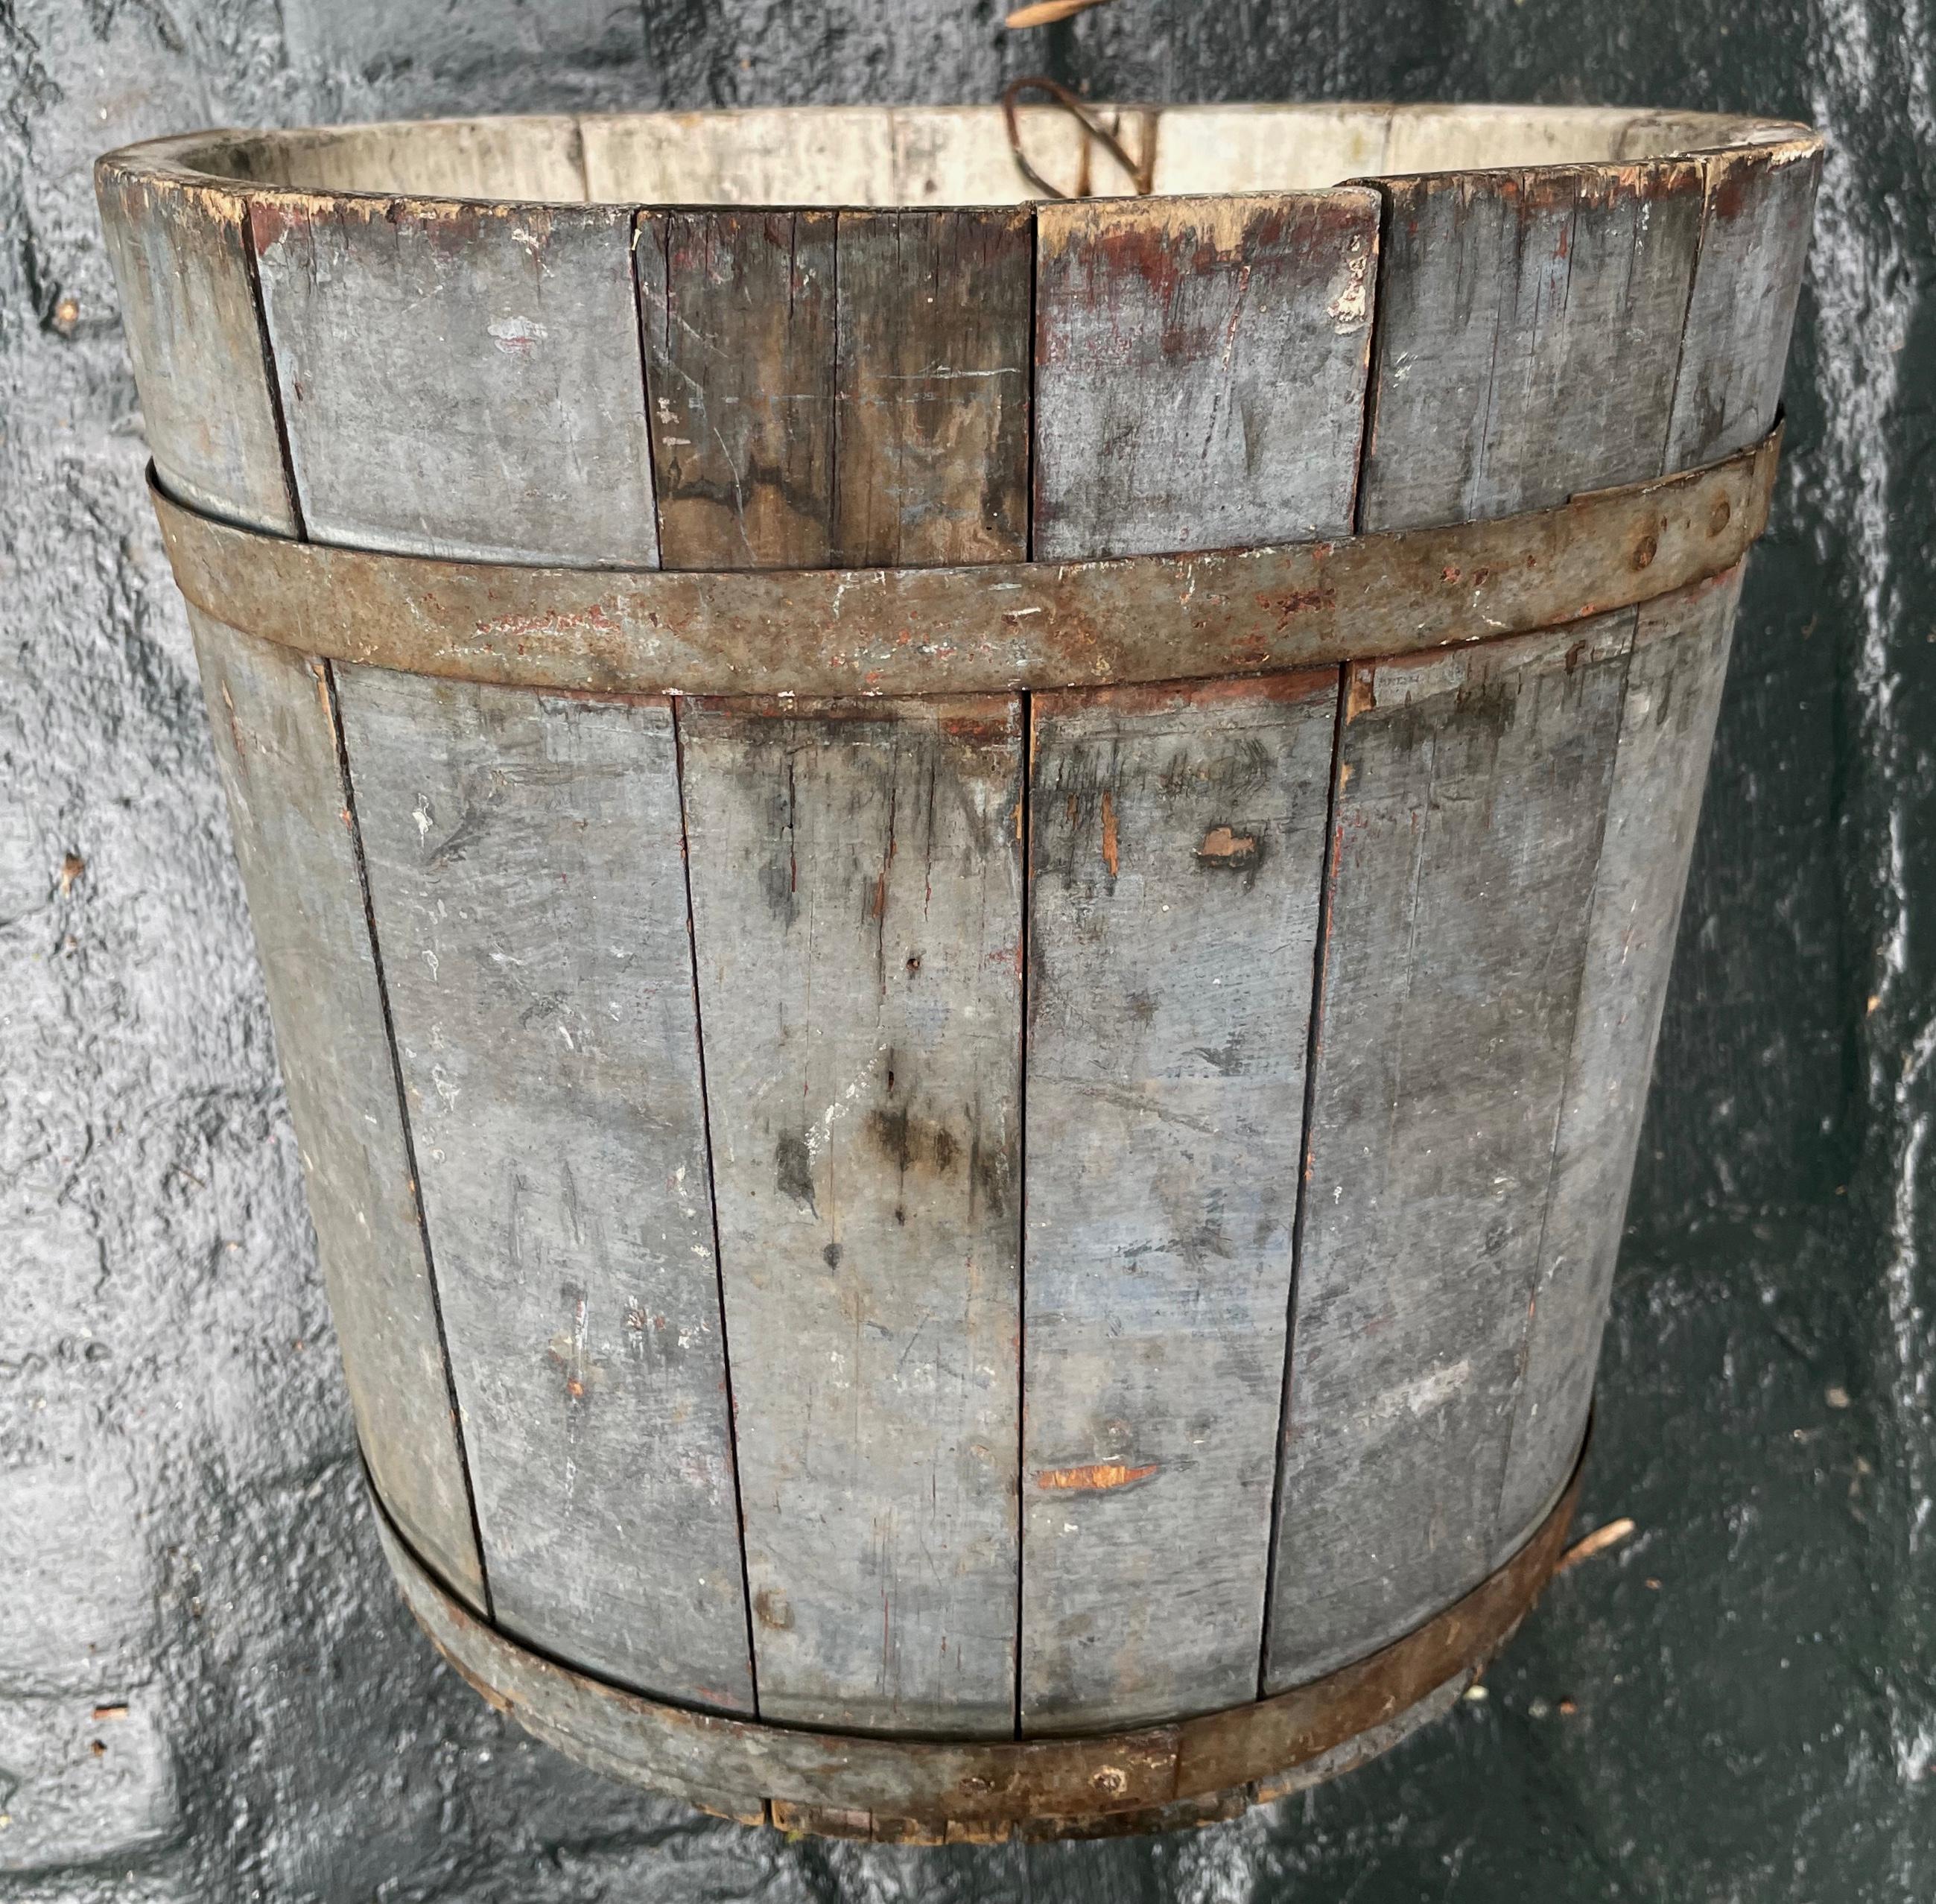 American farmhouse wastebasket. Original vintage grey white wash maple syrup sap bucket/ waste basket with original hardware, perfect for your farmhouse kitchen or bathroom. United States, 1st quarter of 20th century.
Dimensions: 12